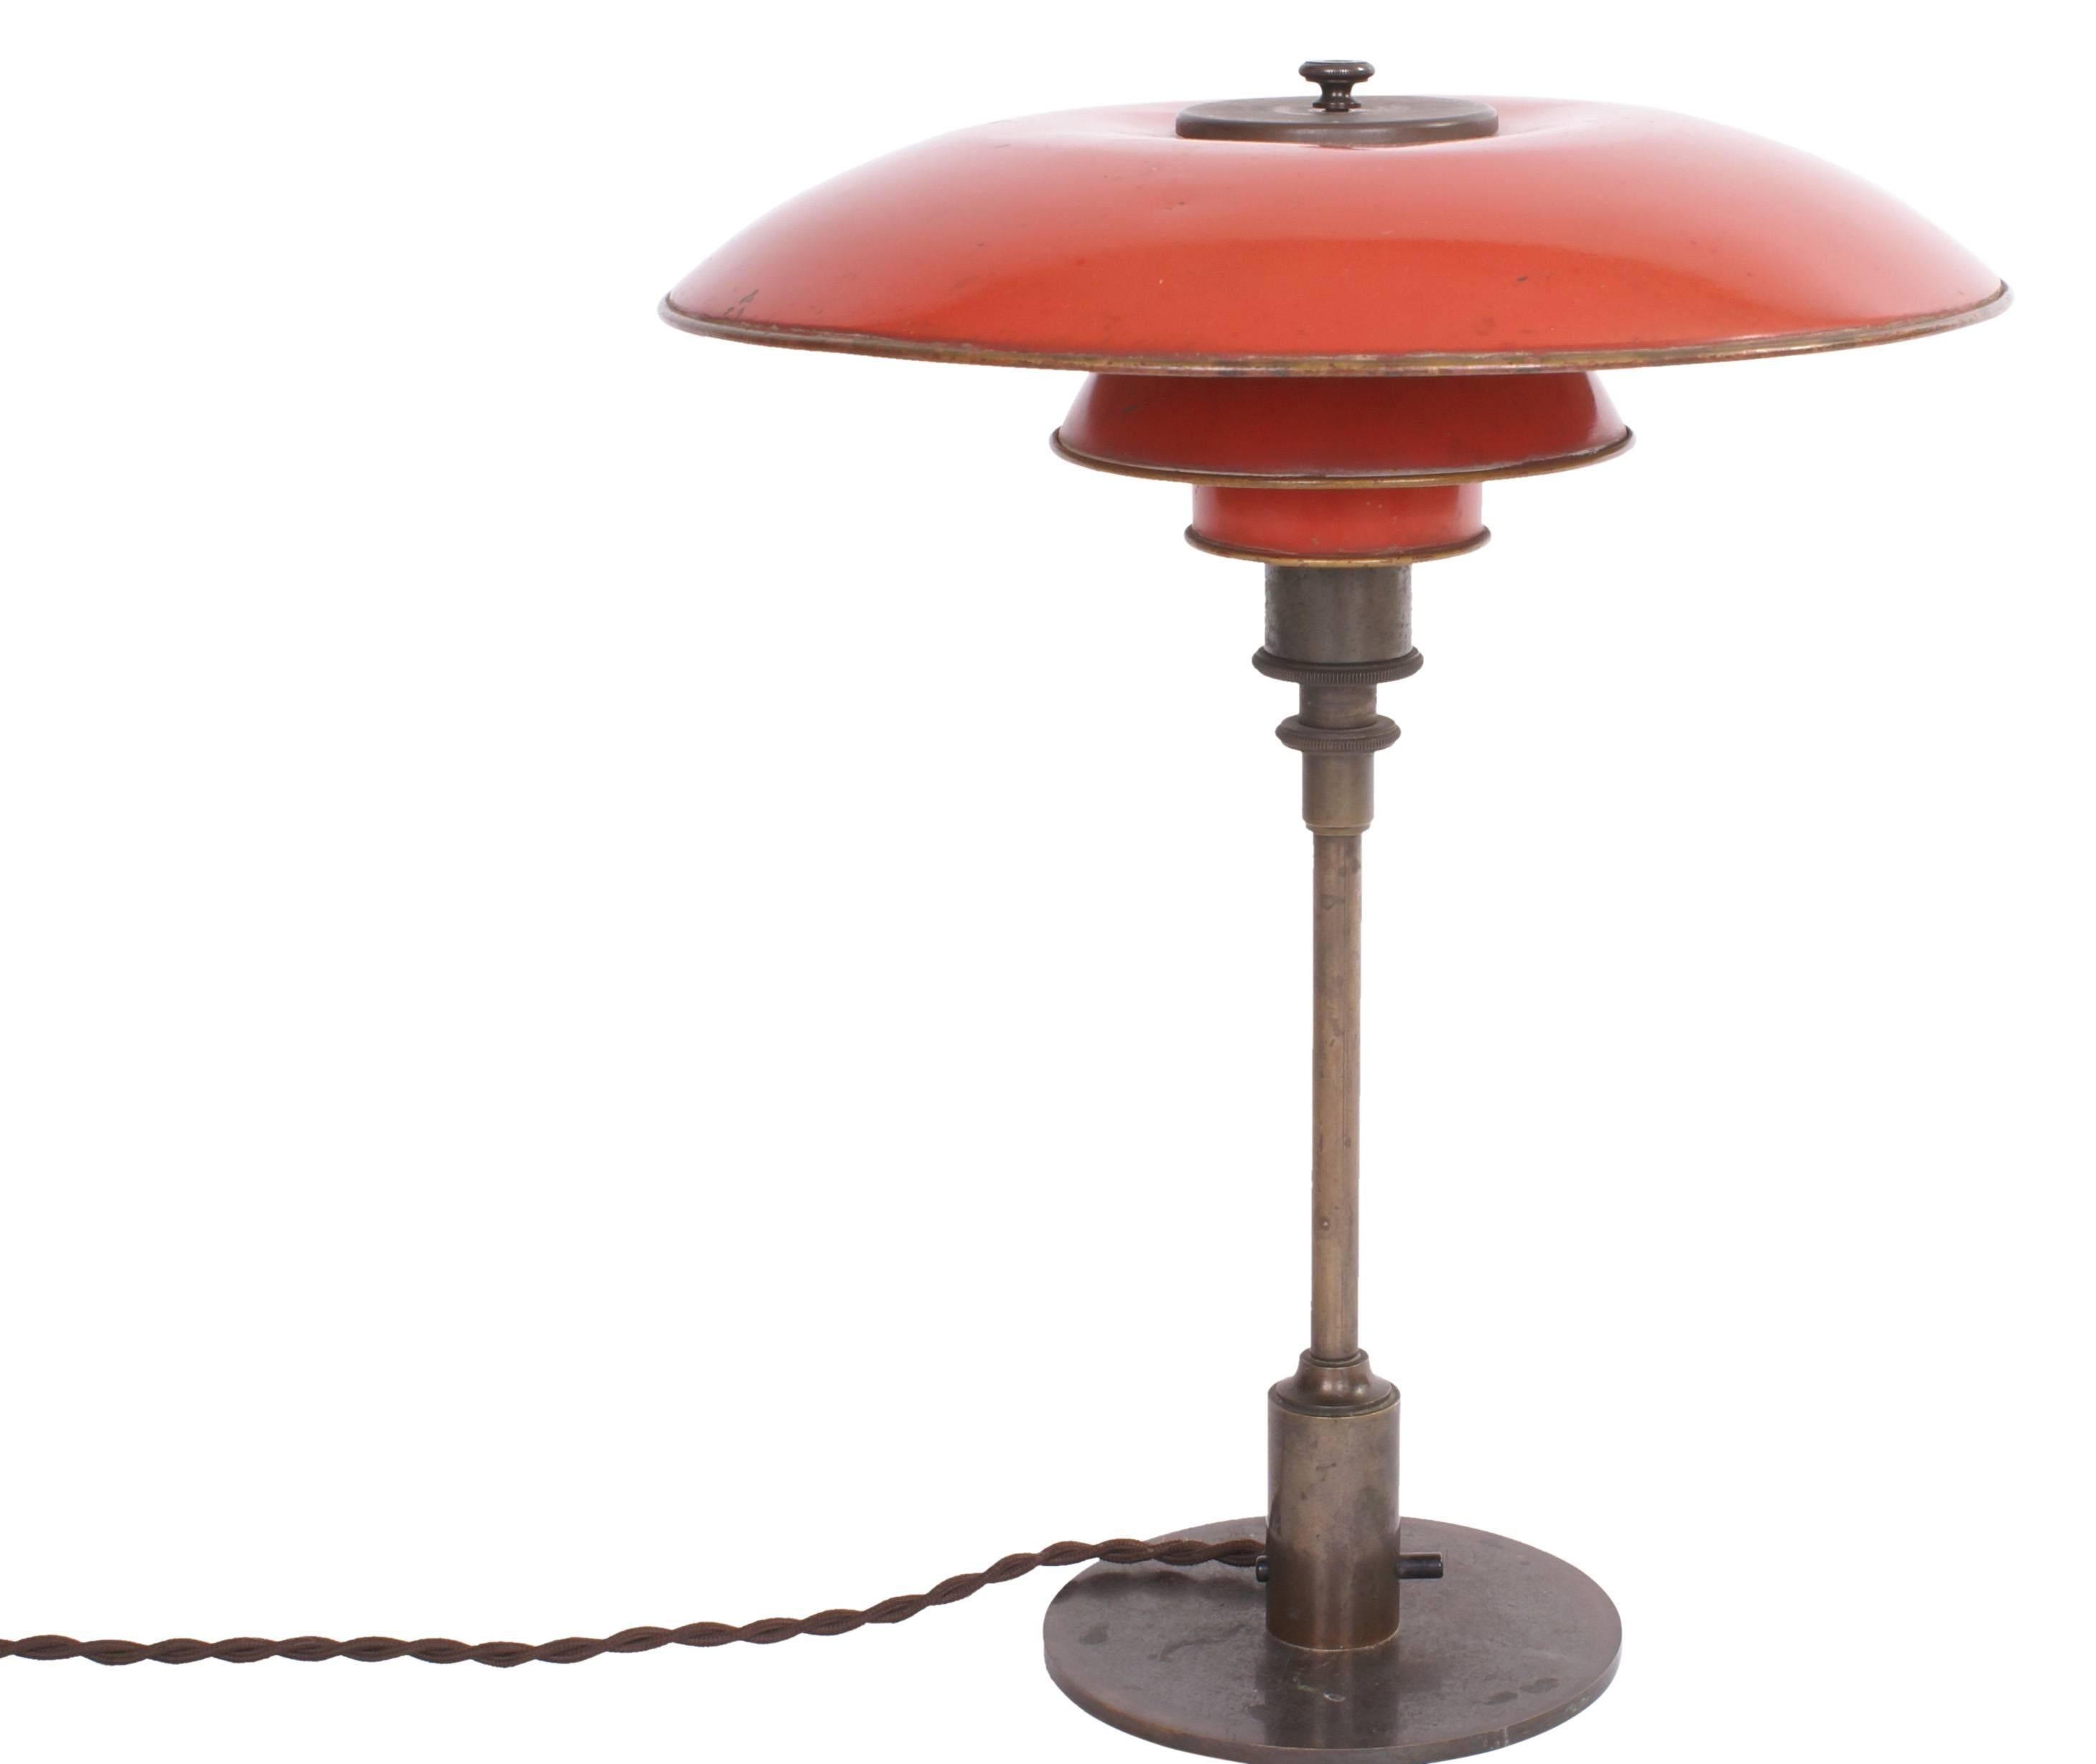 Danish Poul Henningsen PH 3.5/2 Desk Lamp with Red Copper shades - dated 1926-28 For Sale